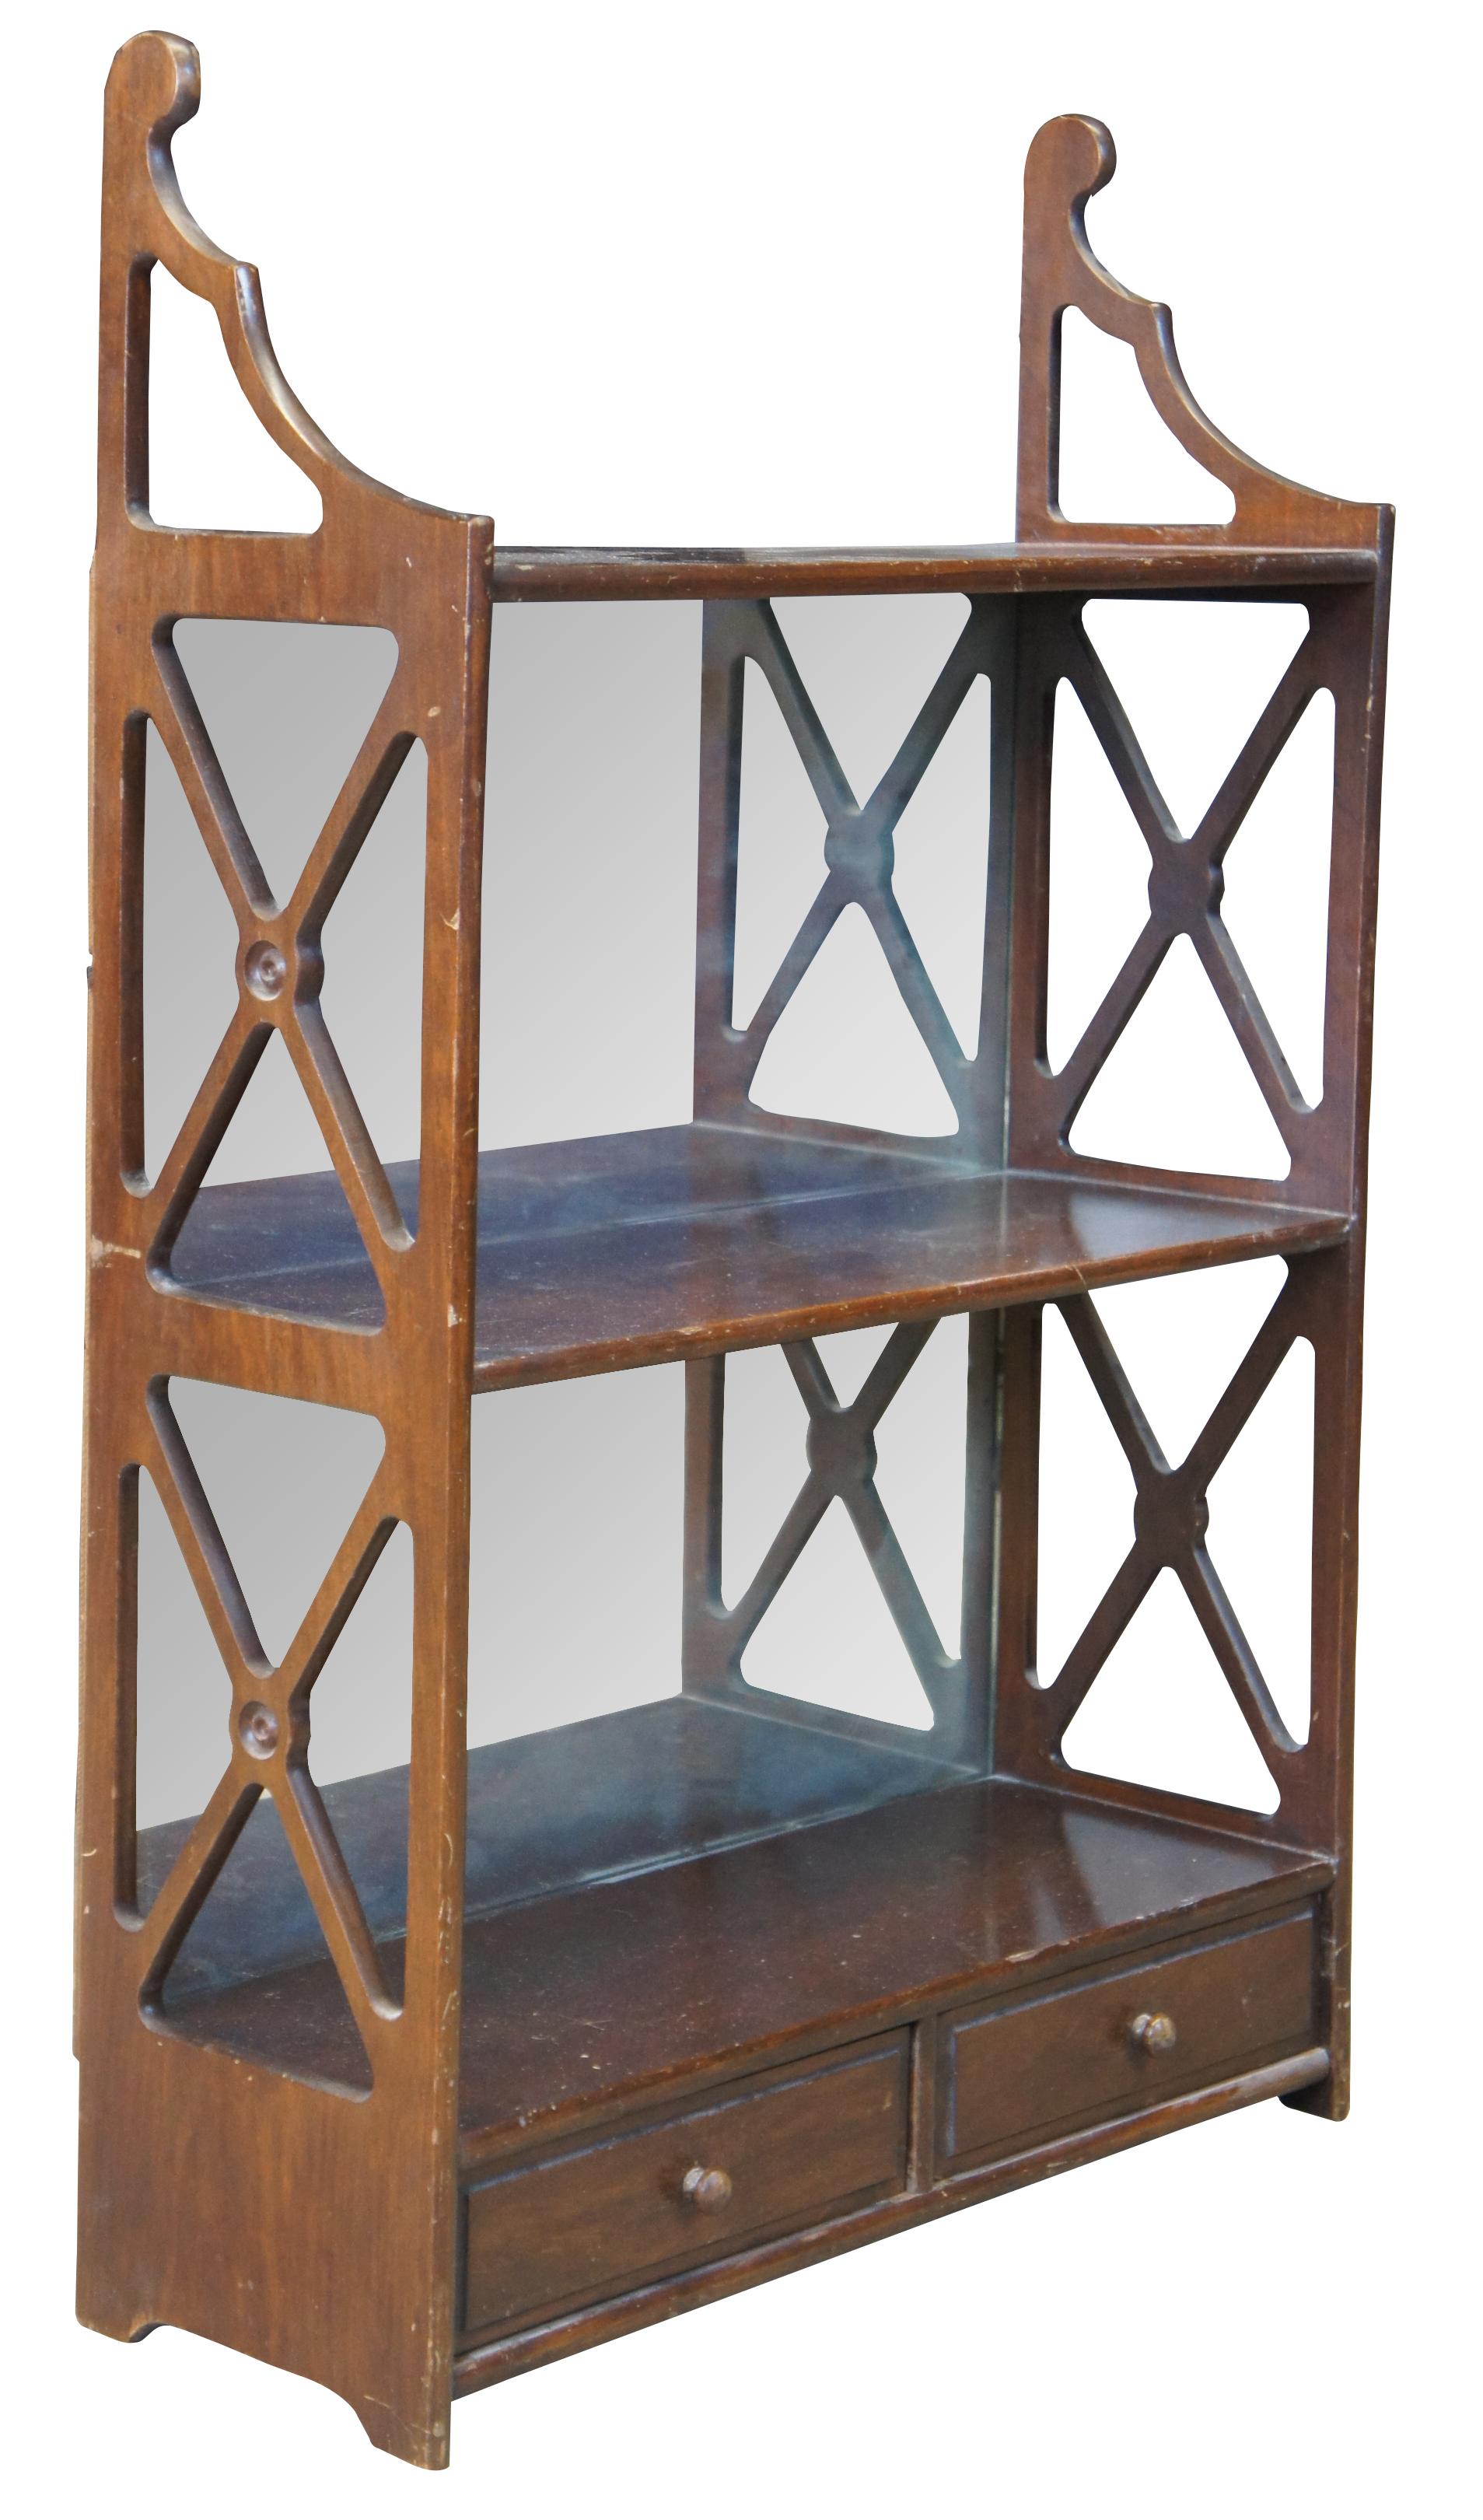 Vintage Georgian style wall shelf, circa 1960s. Features open x paneling along the sides and two drawers for storage.